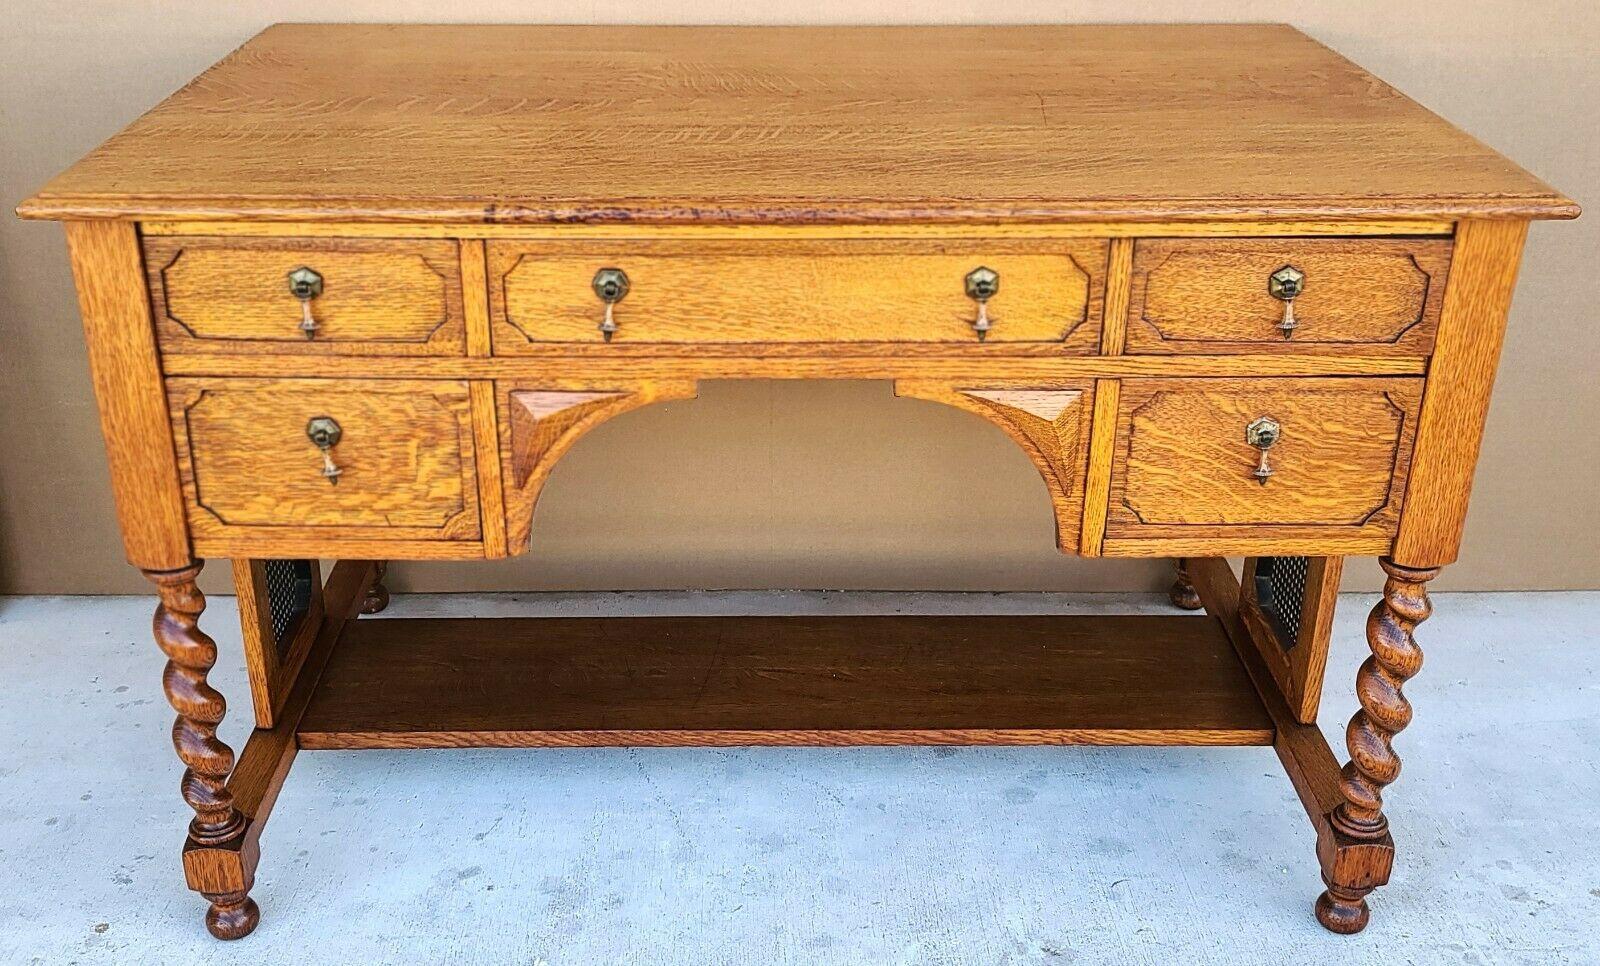 Offering One Of Our Recent Palm Beach Estate Fine Furniture Acquisitions Of A
Antique French Barley Twist Oak & Cane Desk

Approximate Measurements in Inches
30